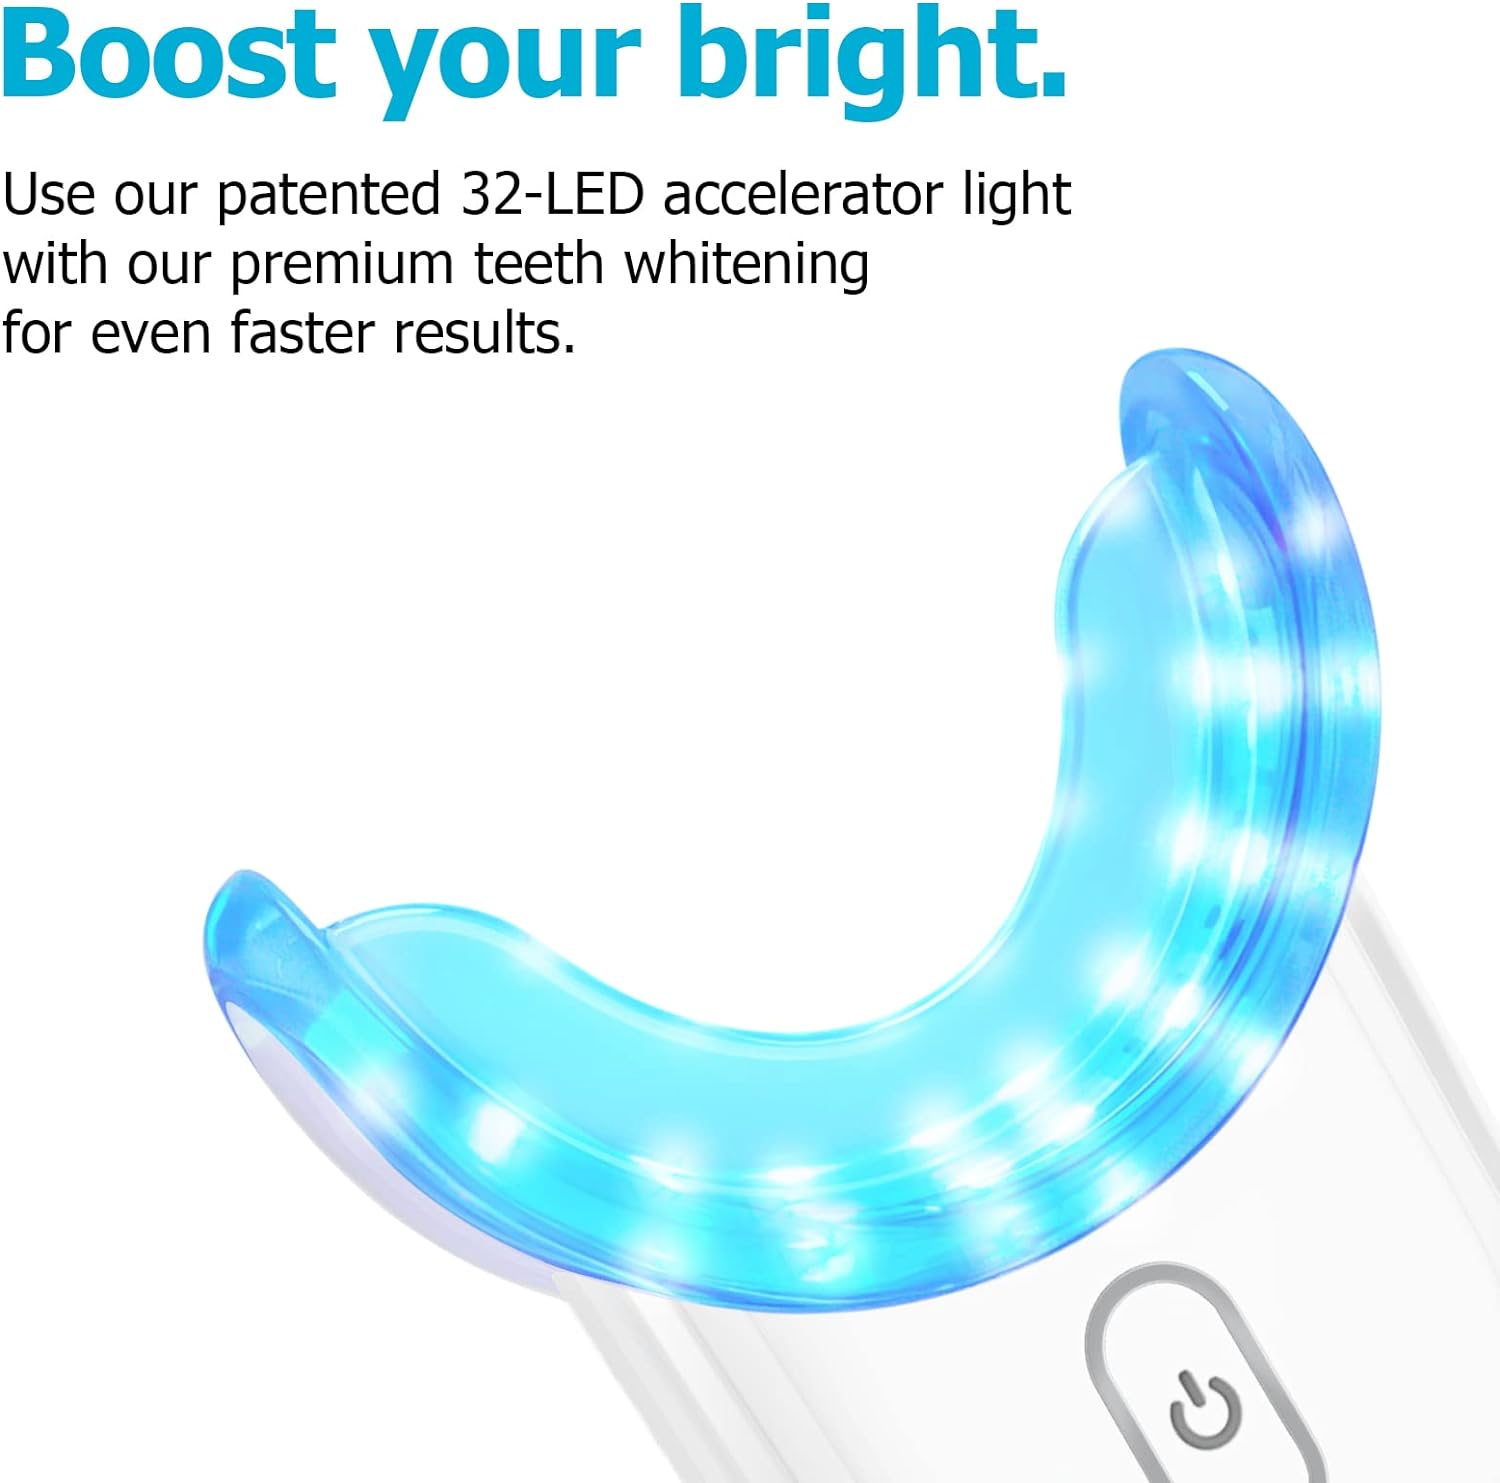 Teeth Whitening Kit Gel Pen Strips -  Specially Formulated for Sensitive Teeth, Gum, Braces Care 32X LED Light Tooth Whitener, Professional Oral Beauty Products Dental Tools 2 Mouth Trays